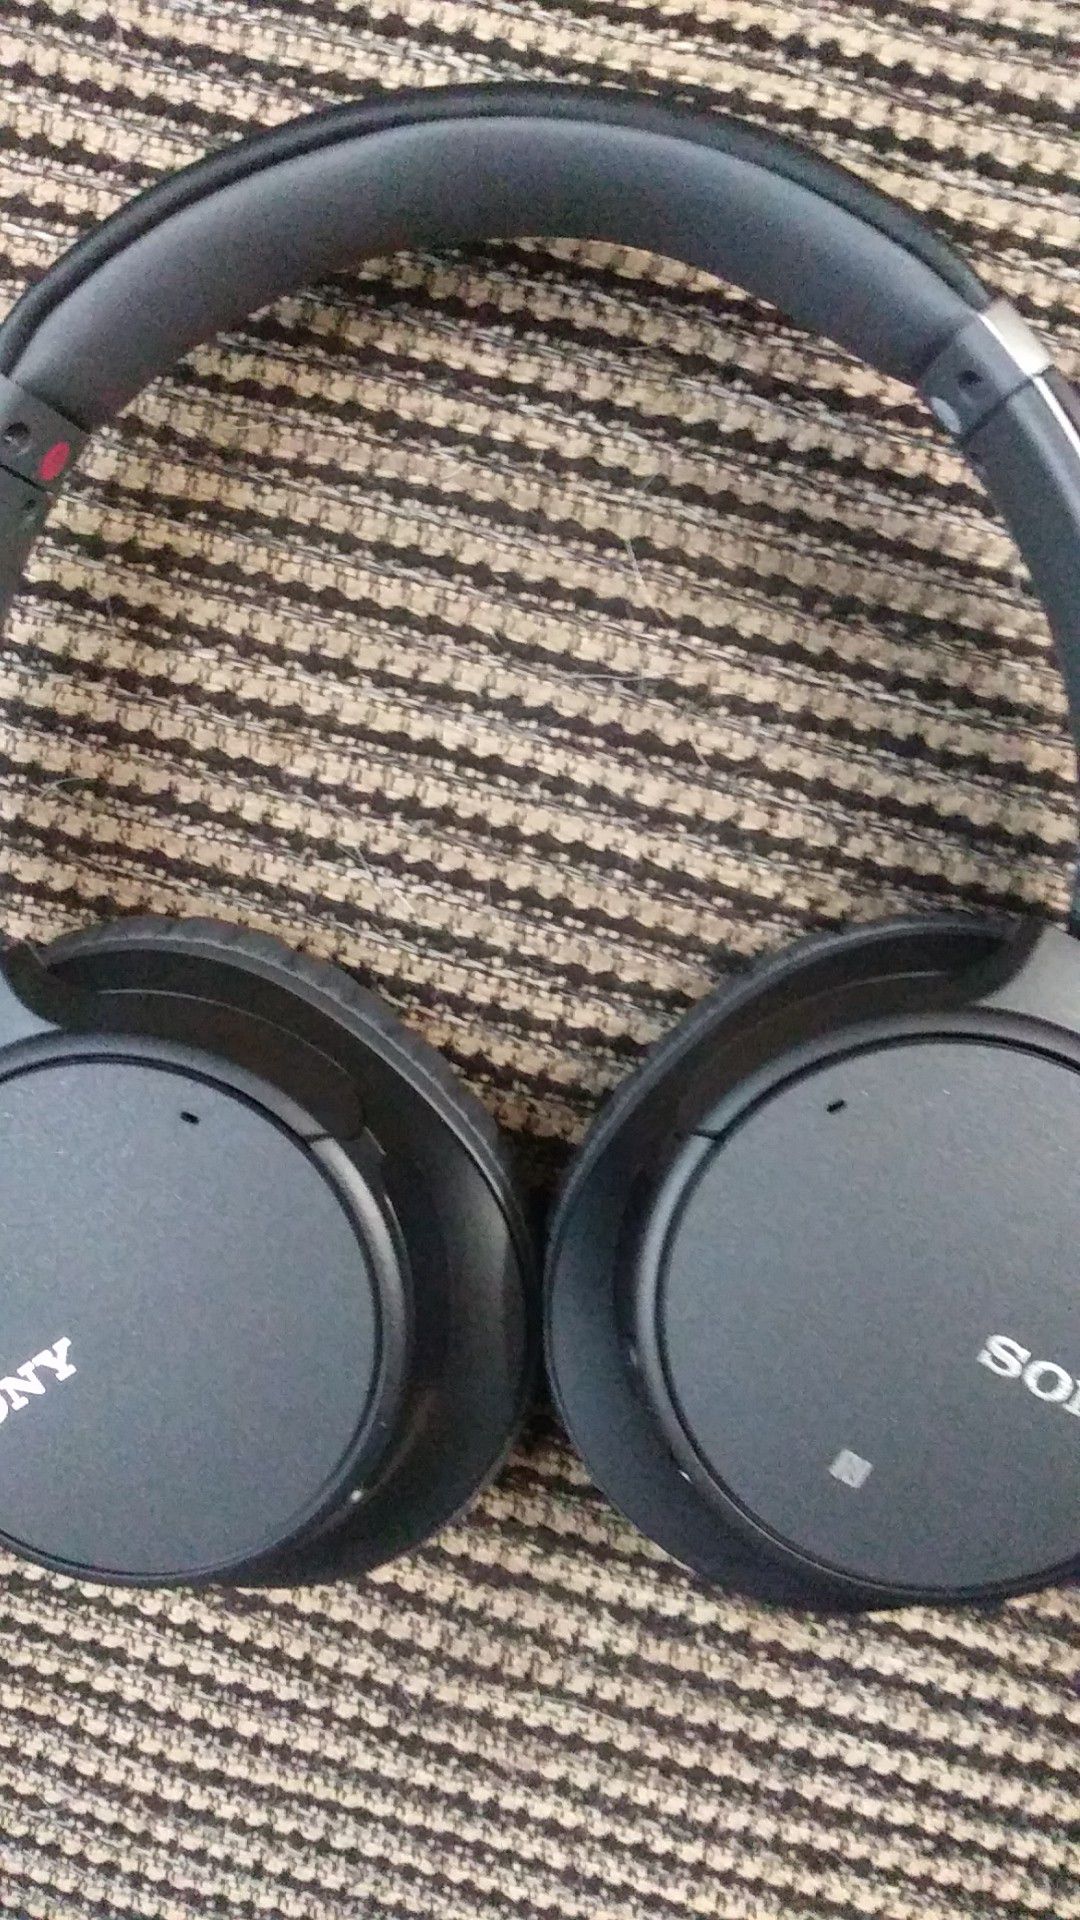 Sony ch700n noise cancelling headphones